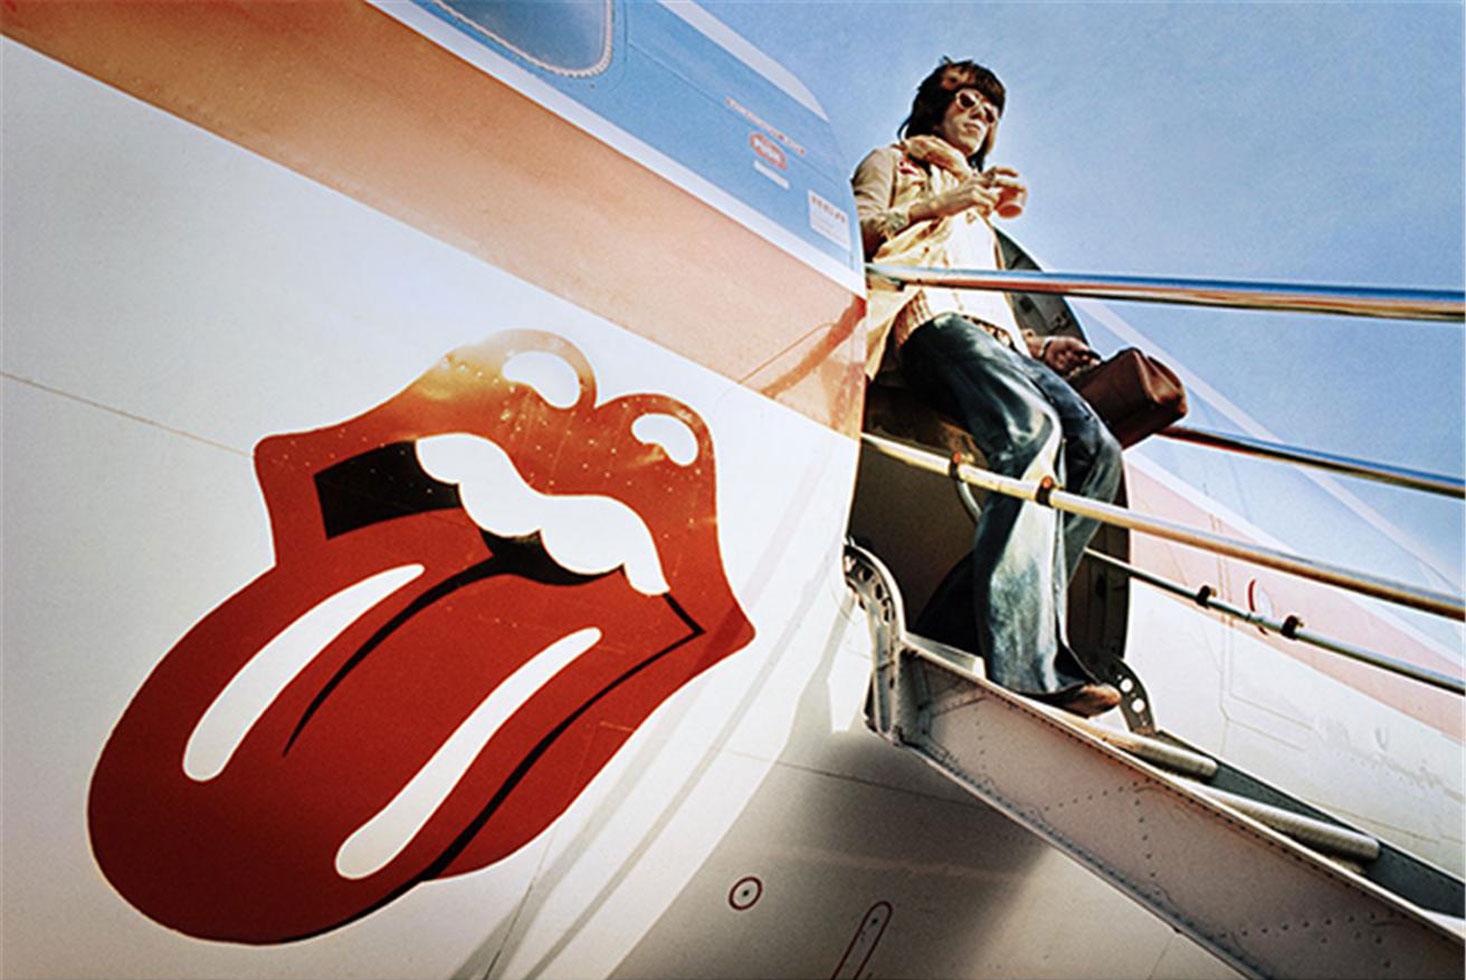 Ethan Russell Color Photograph - Keith Richards "Airplane"